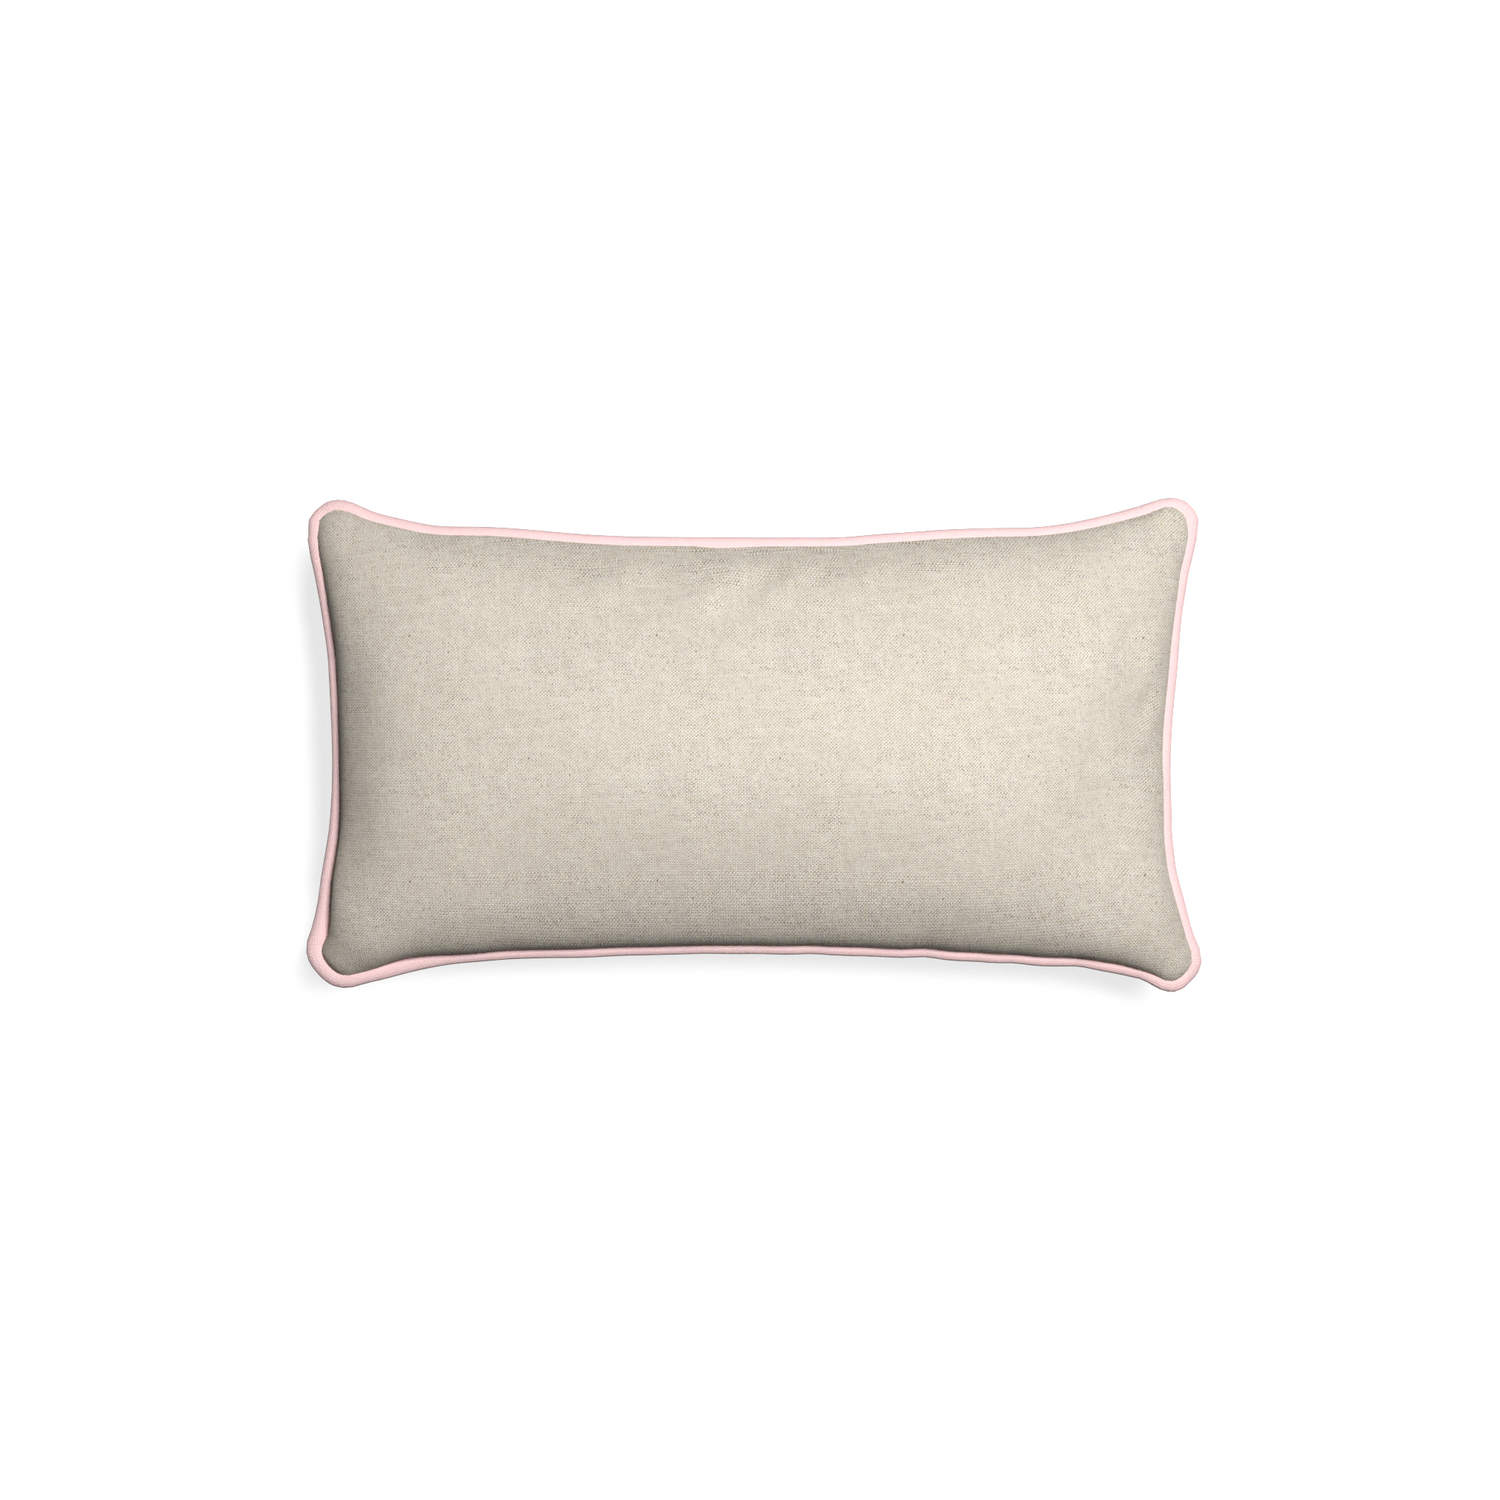 Petite-lumbar oat custom light brownpillow with petal piping on white background